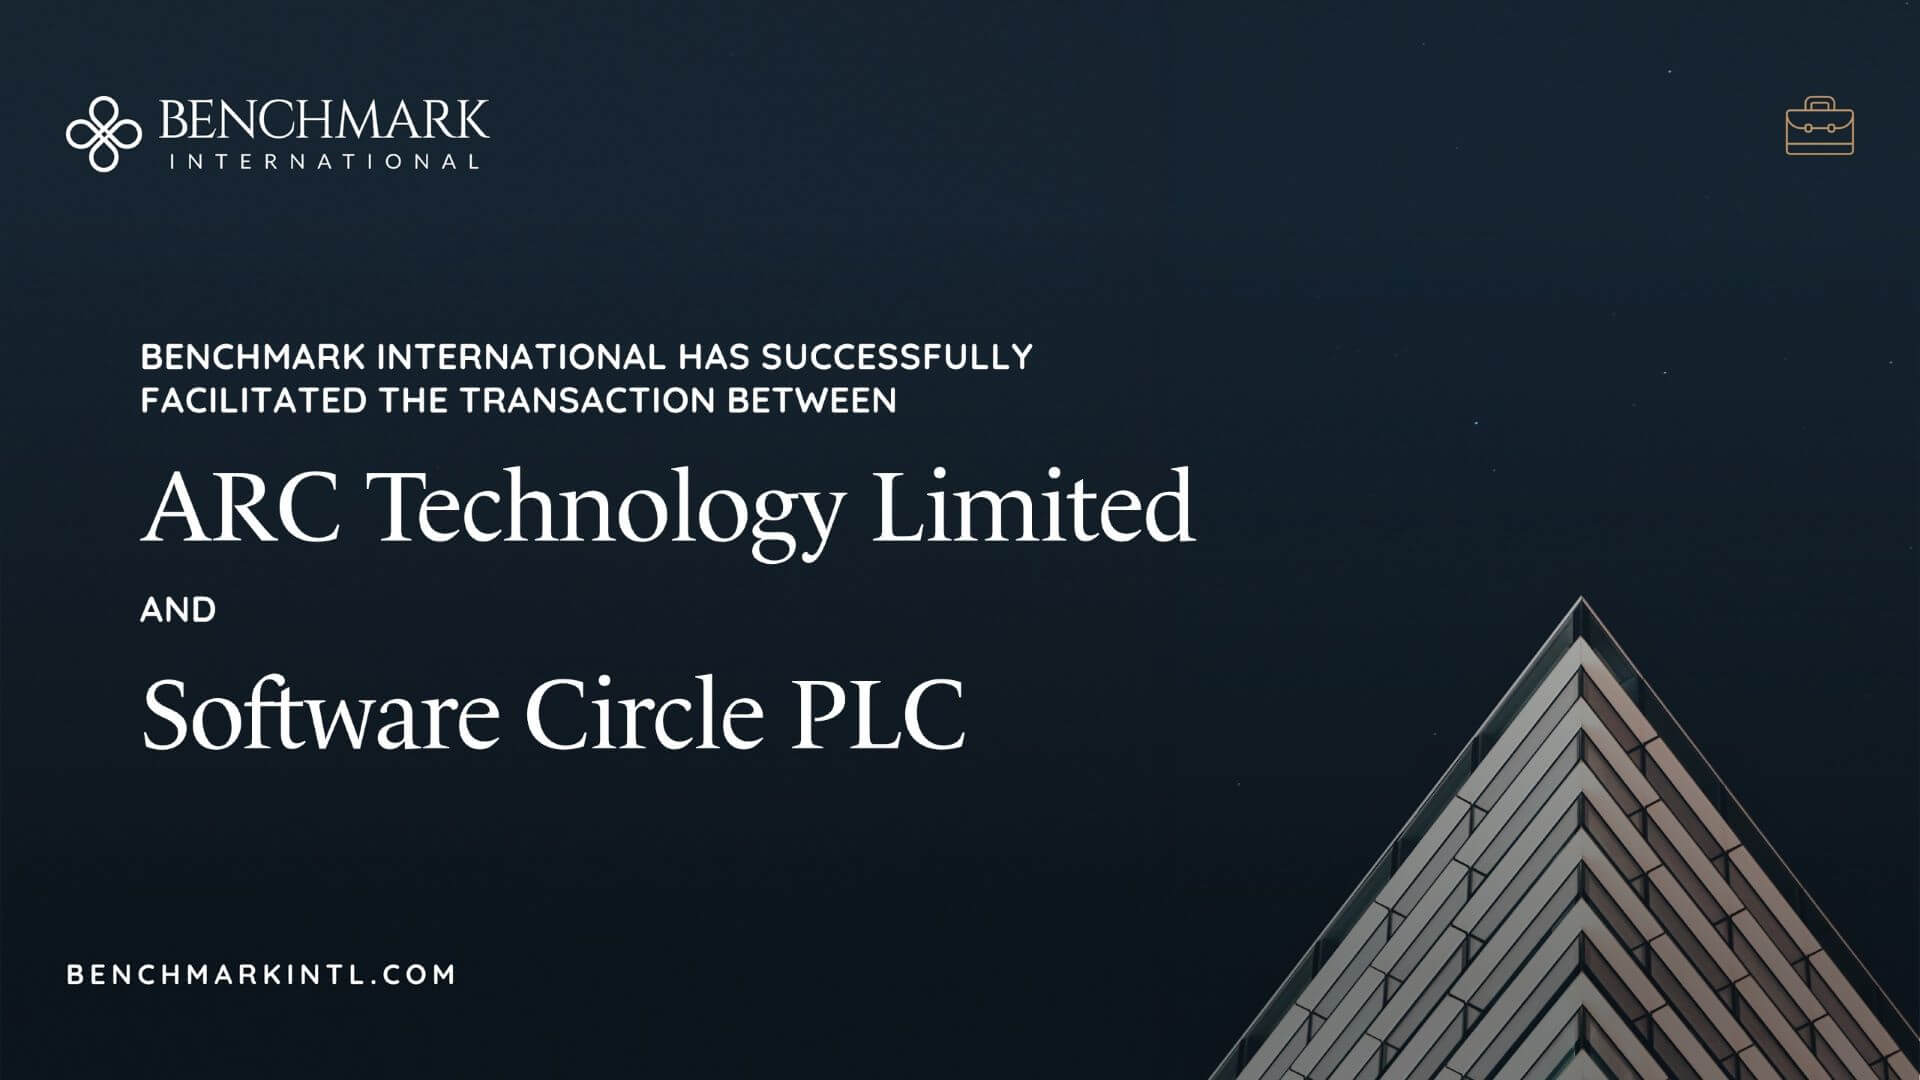 Benchmark International Successfully Facilitated the Transaction Between ARC Technology Limited and Software Circle PLC